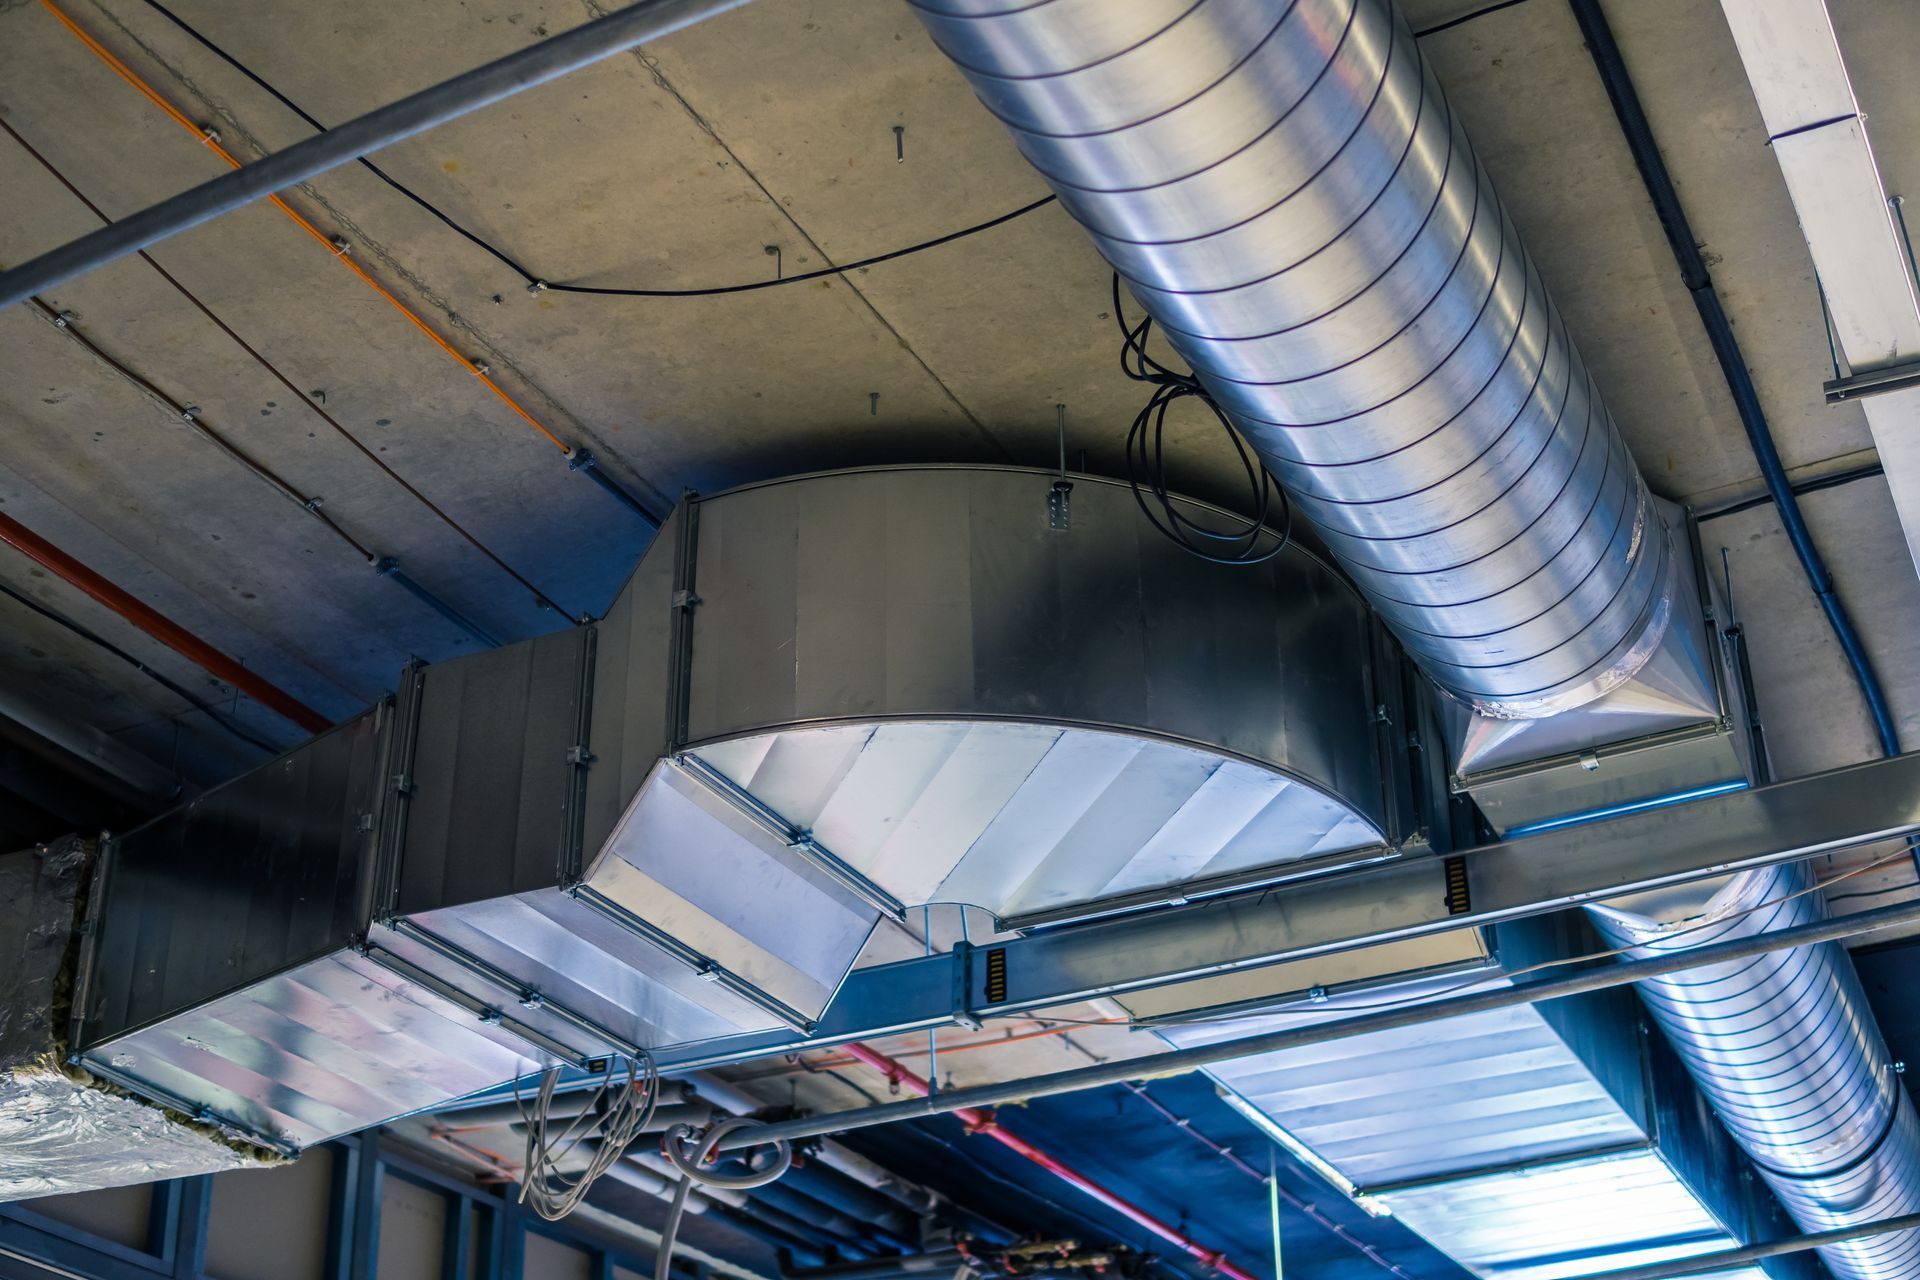 Commercial Ductwork Installation